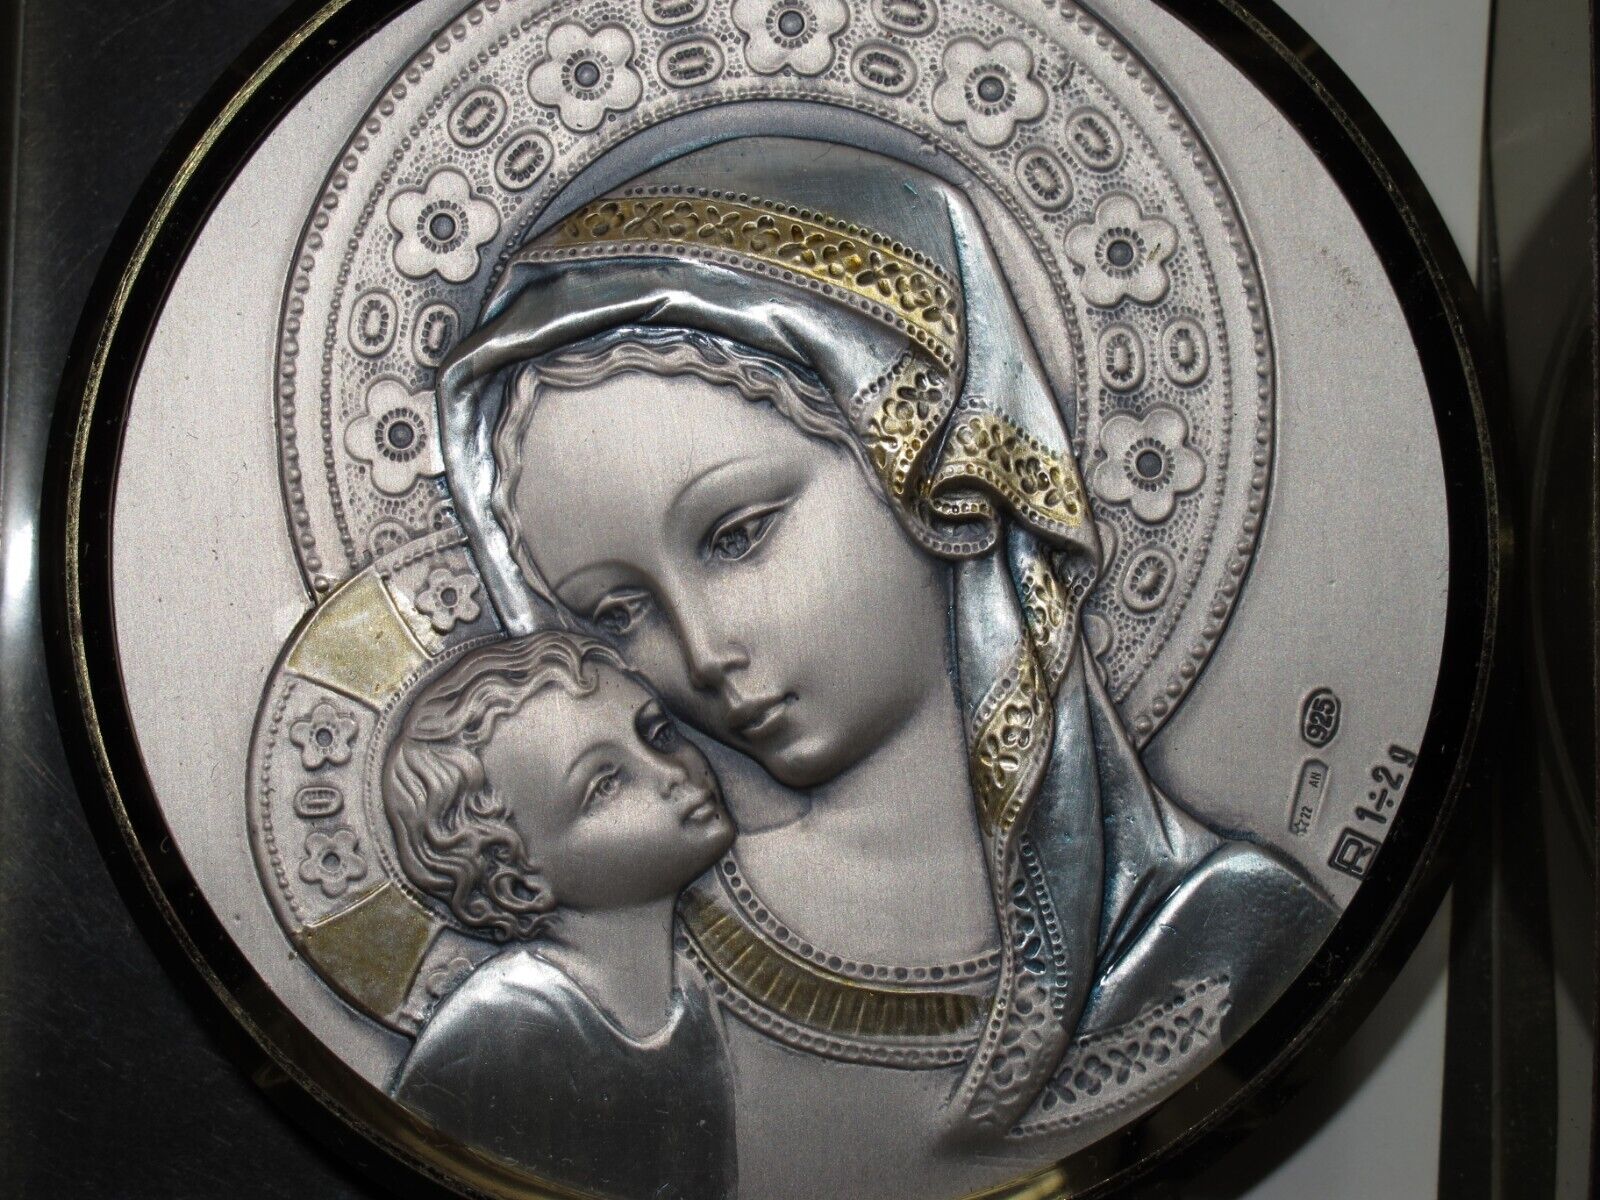 Made in ITALY - Virgin Mary & Jesus - Marked 925, w Case, Certificate